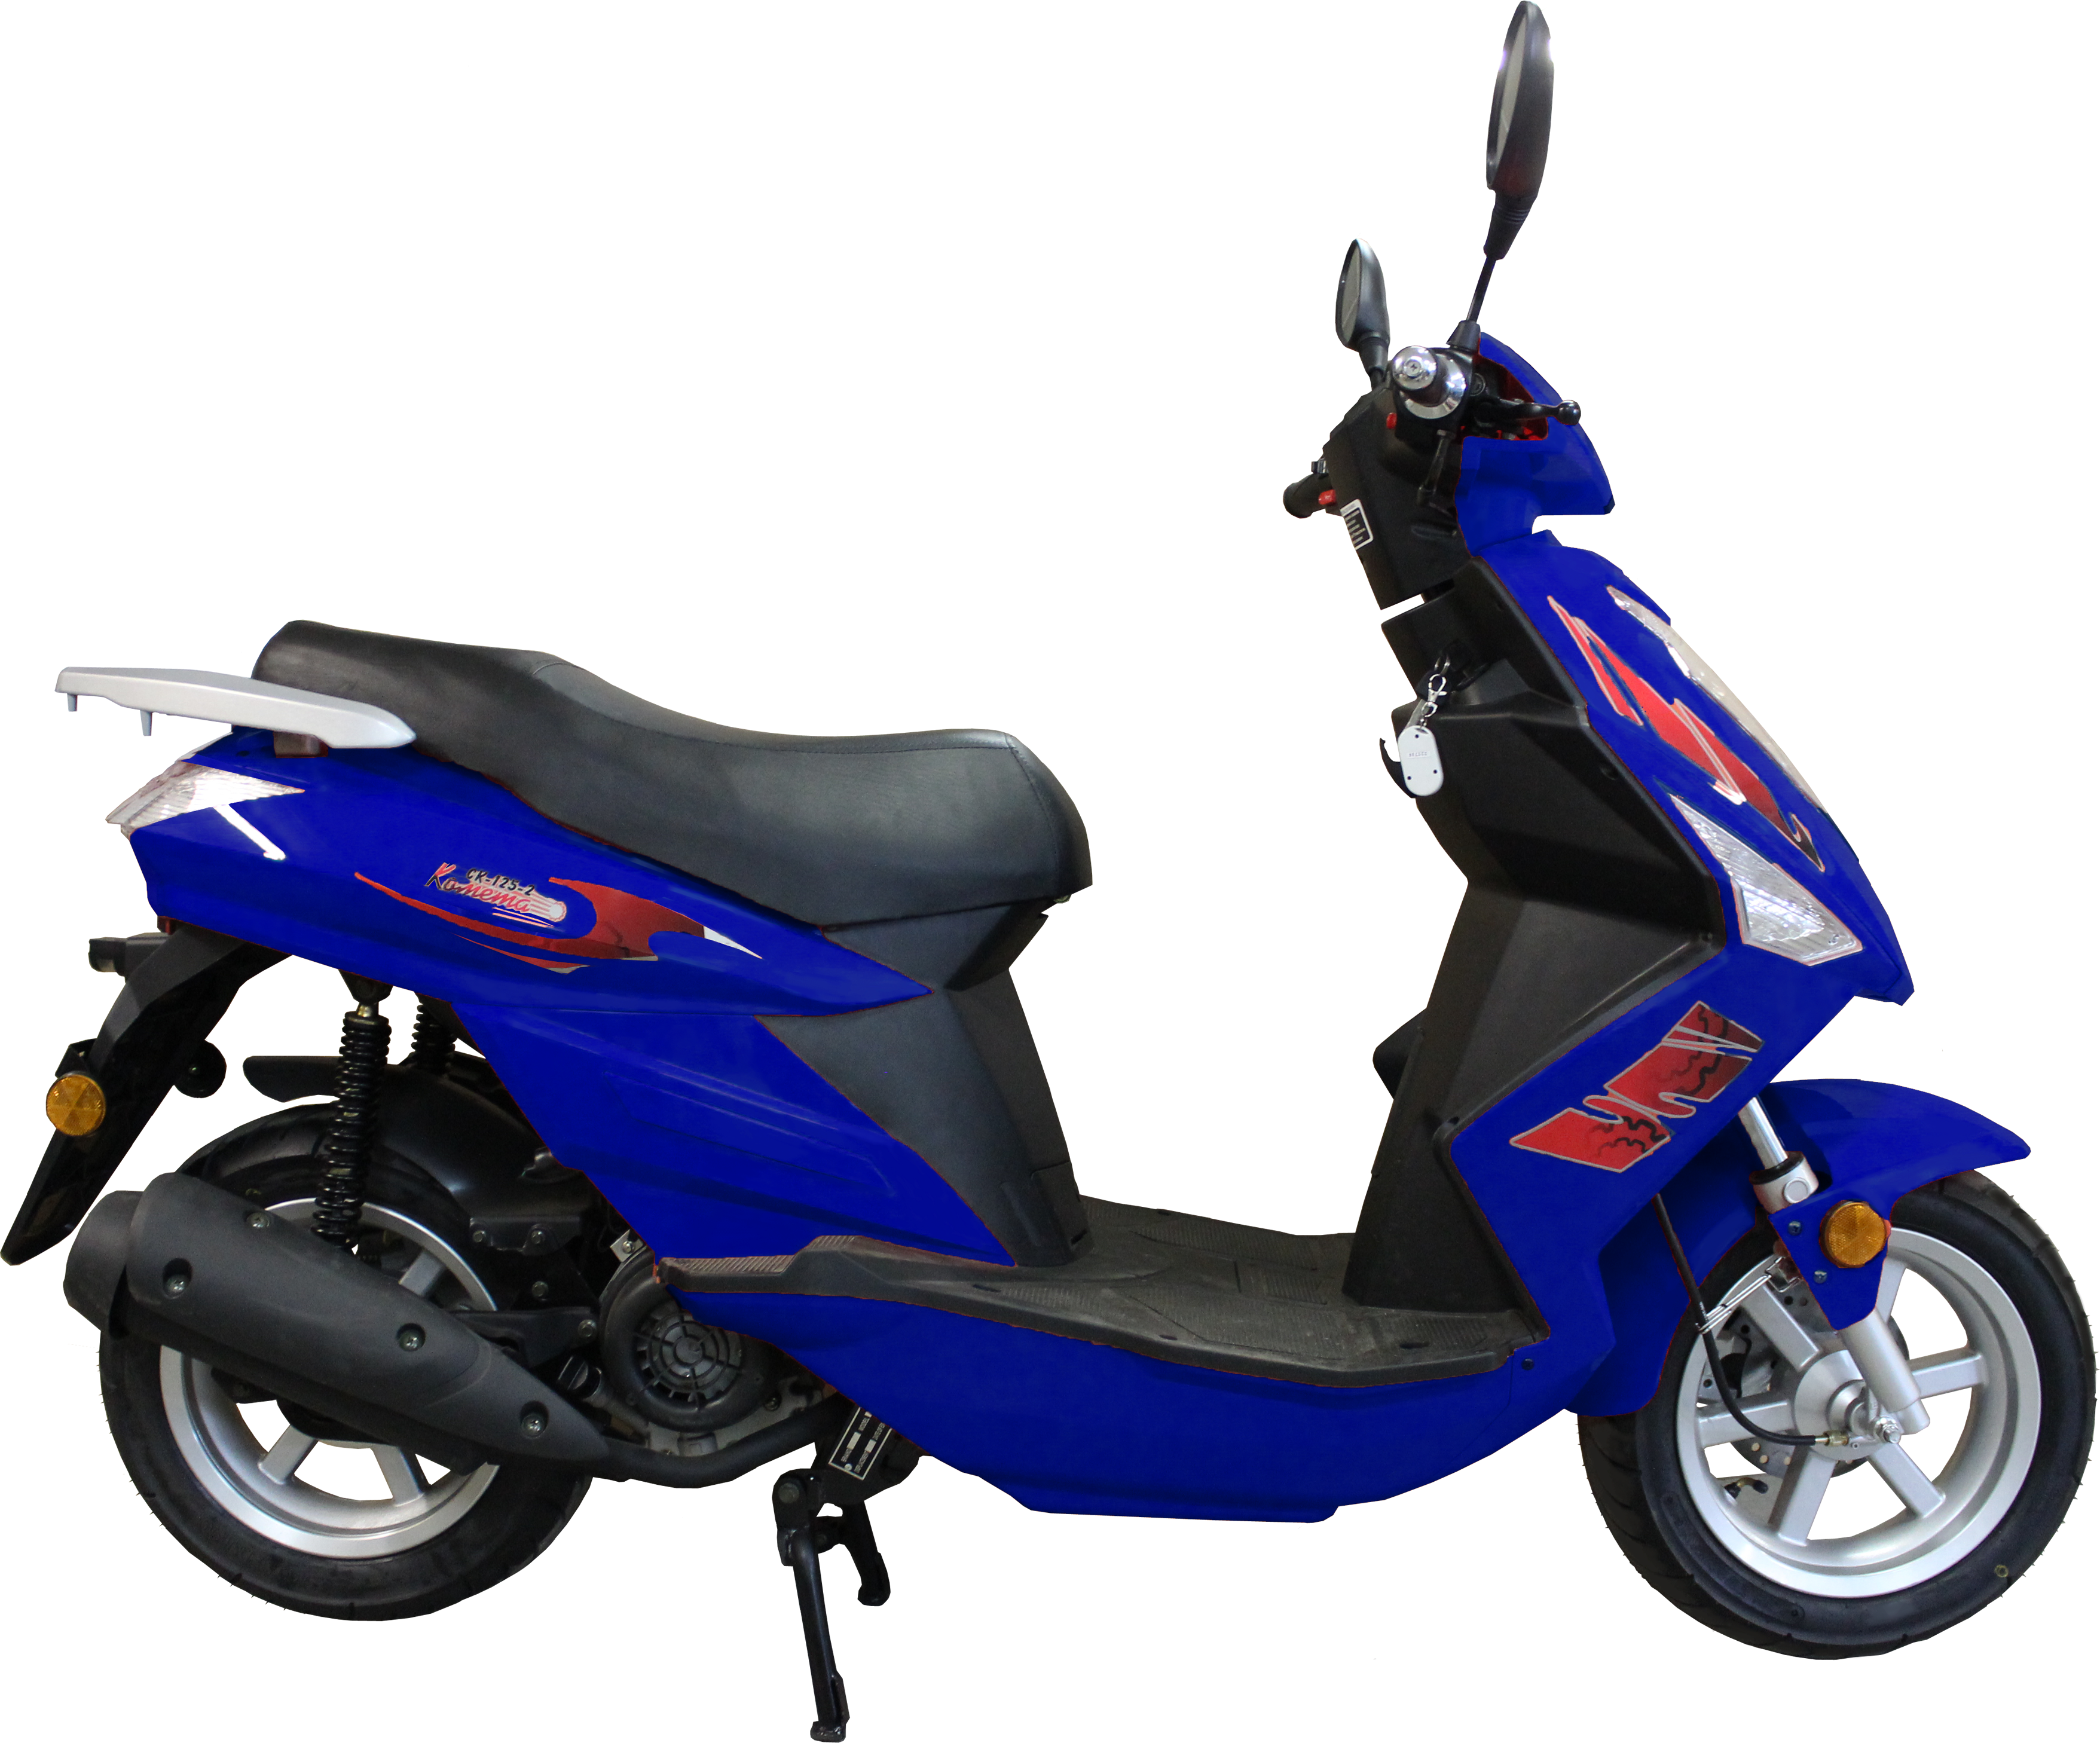 Scooter PNG image